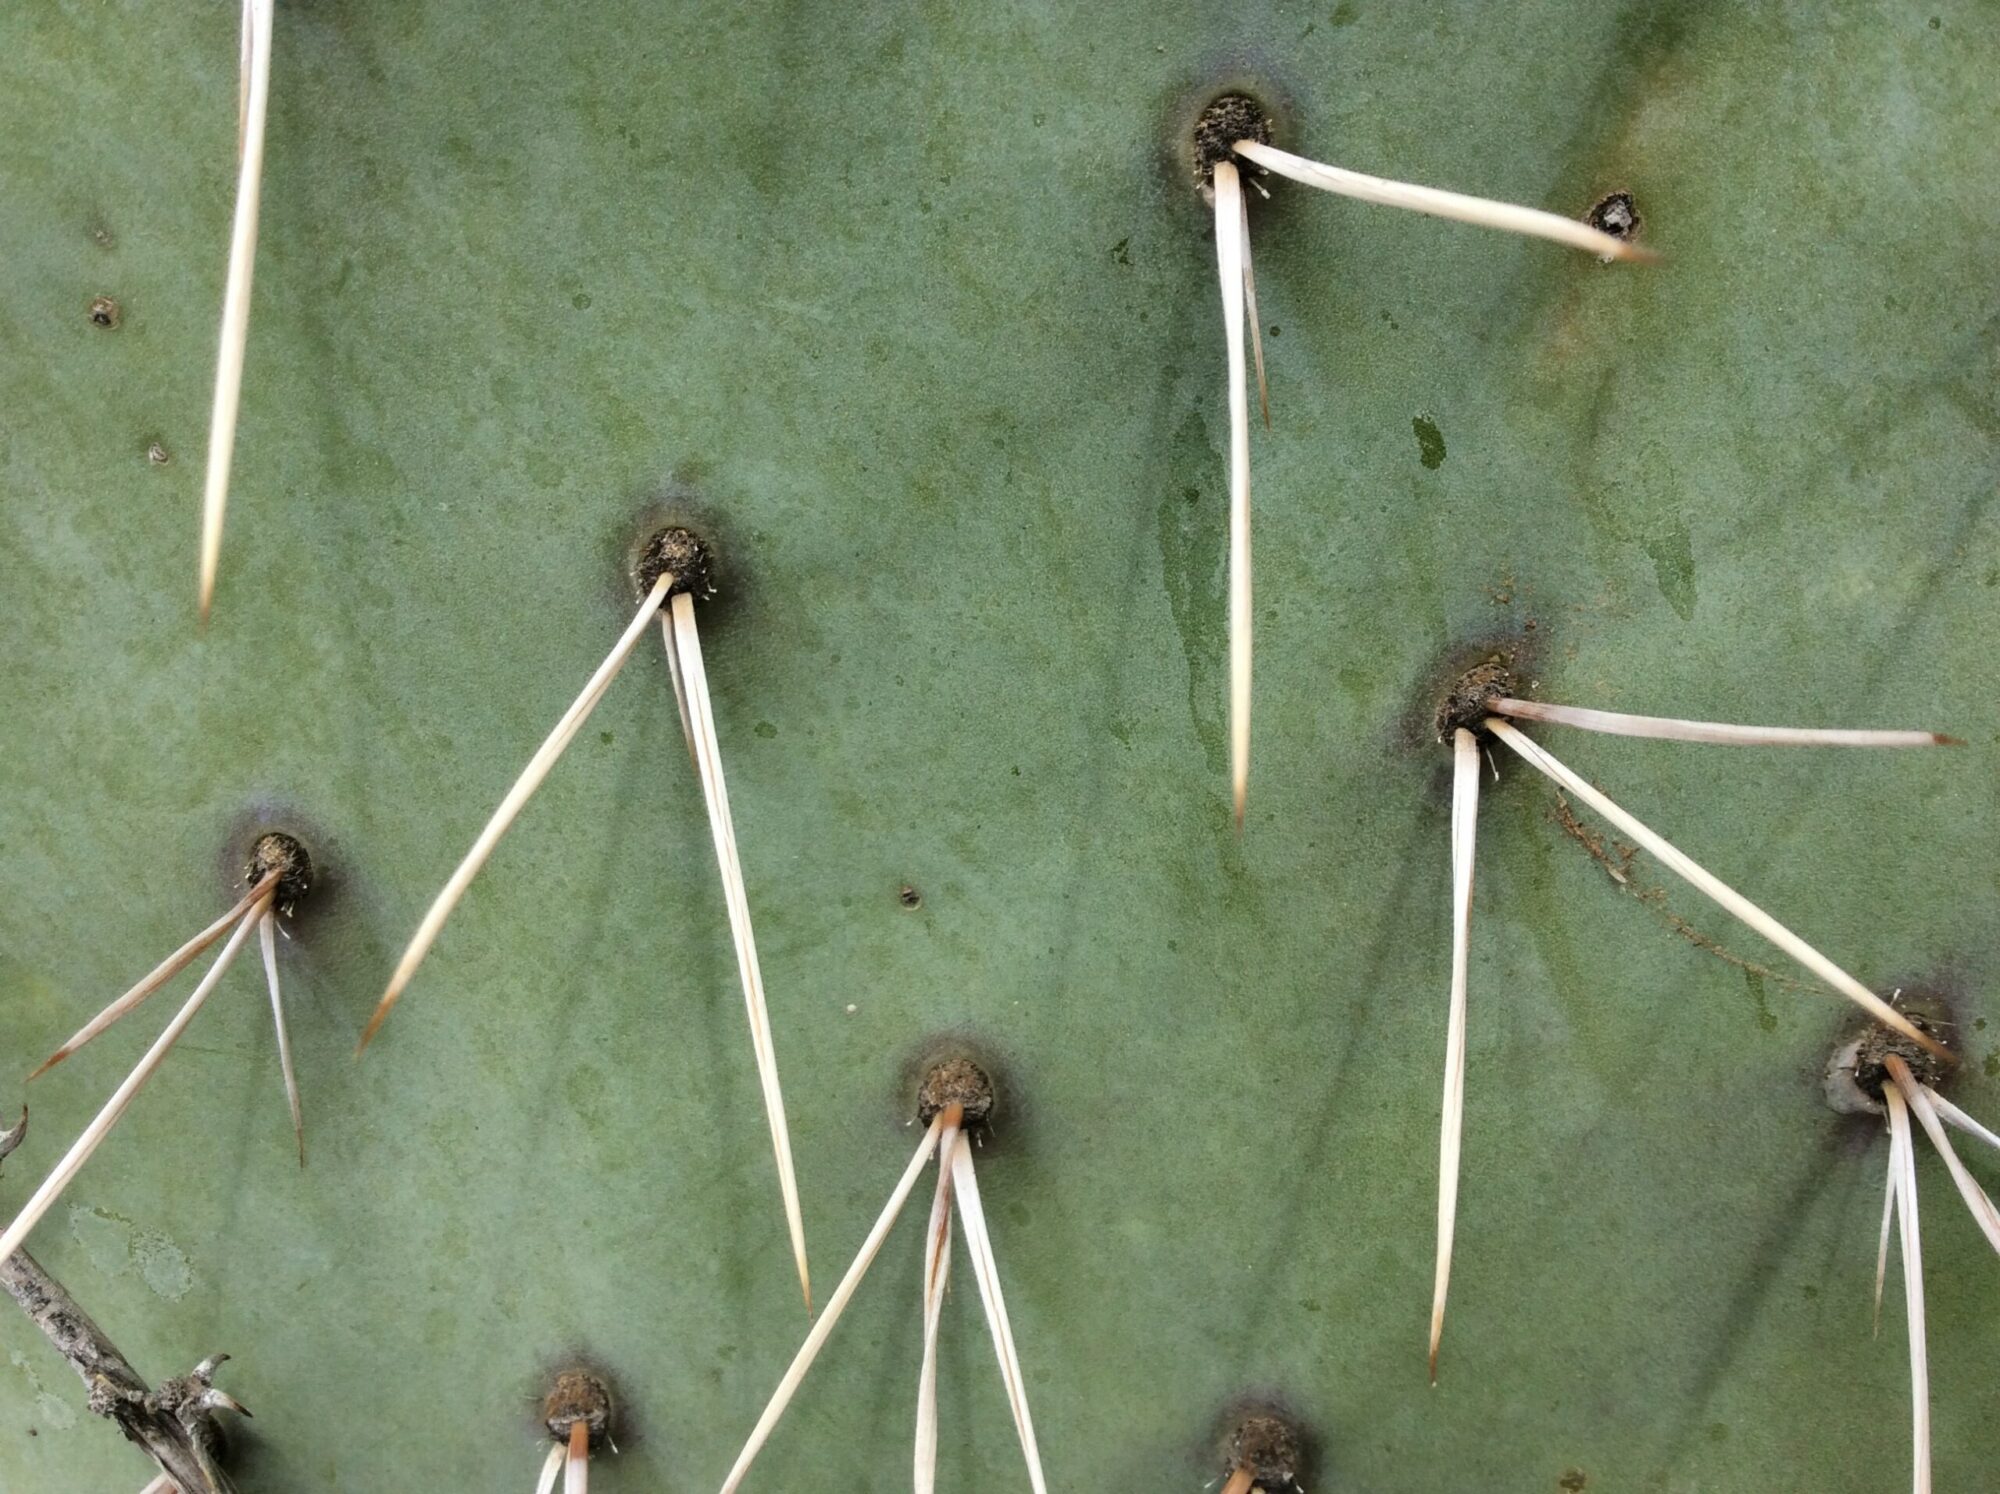 How to remove cactus spines (including ones stuck in your throat)